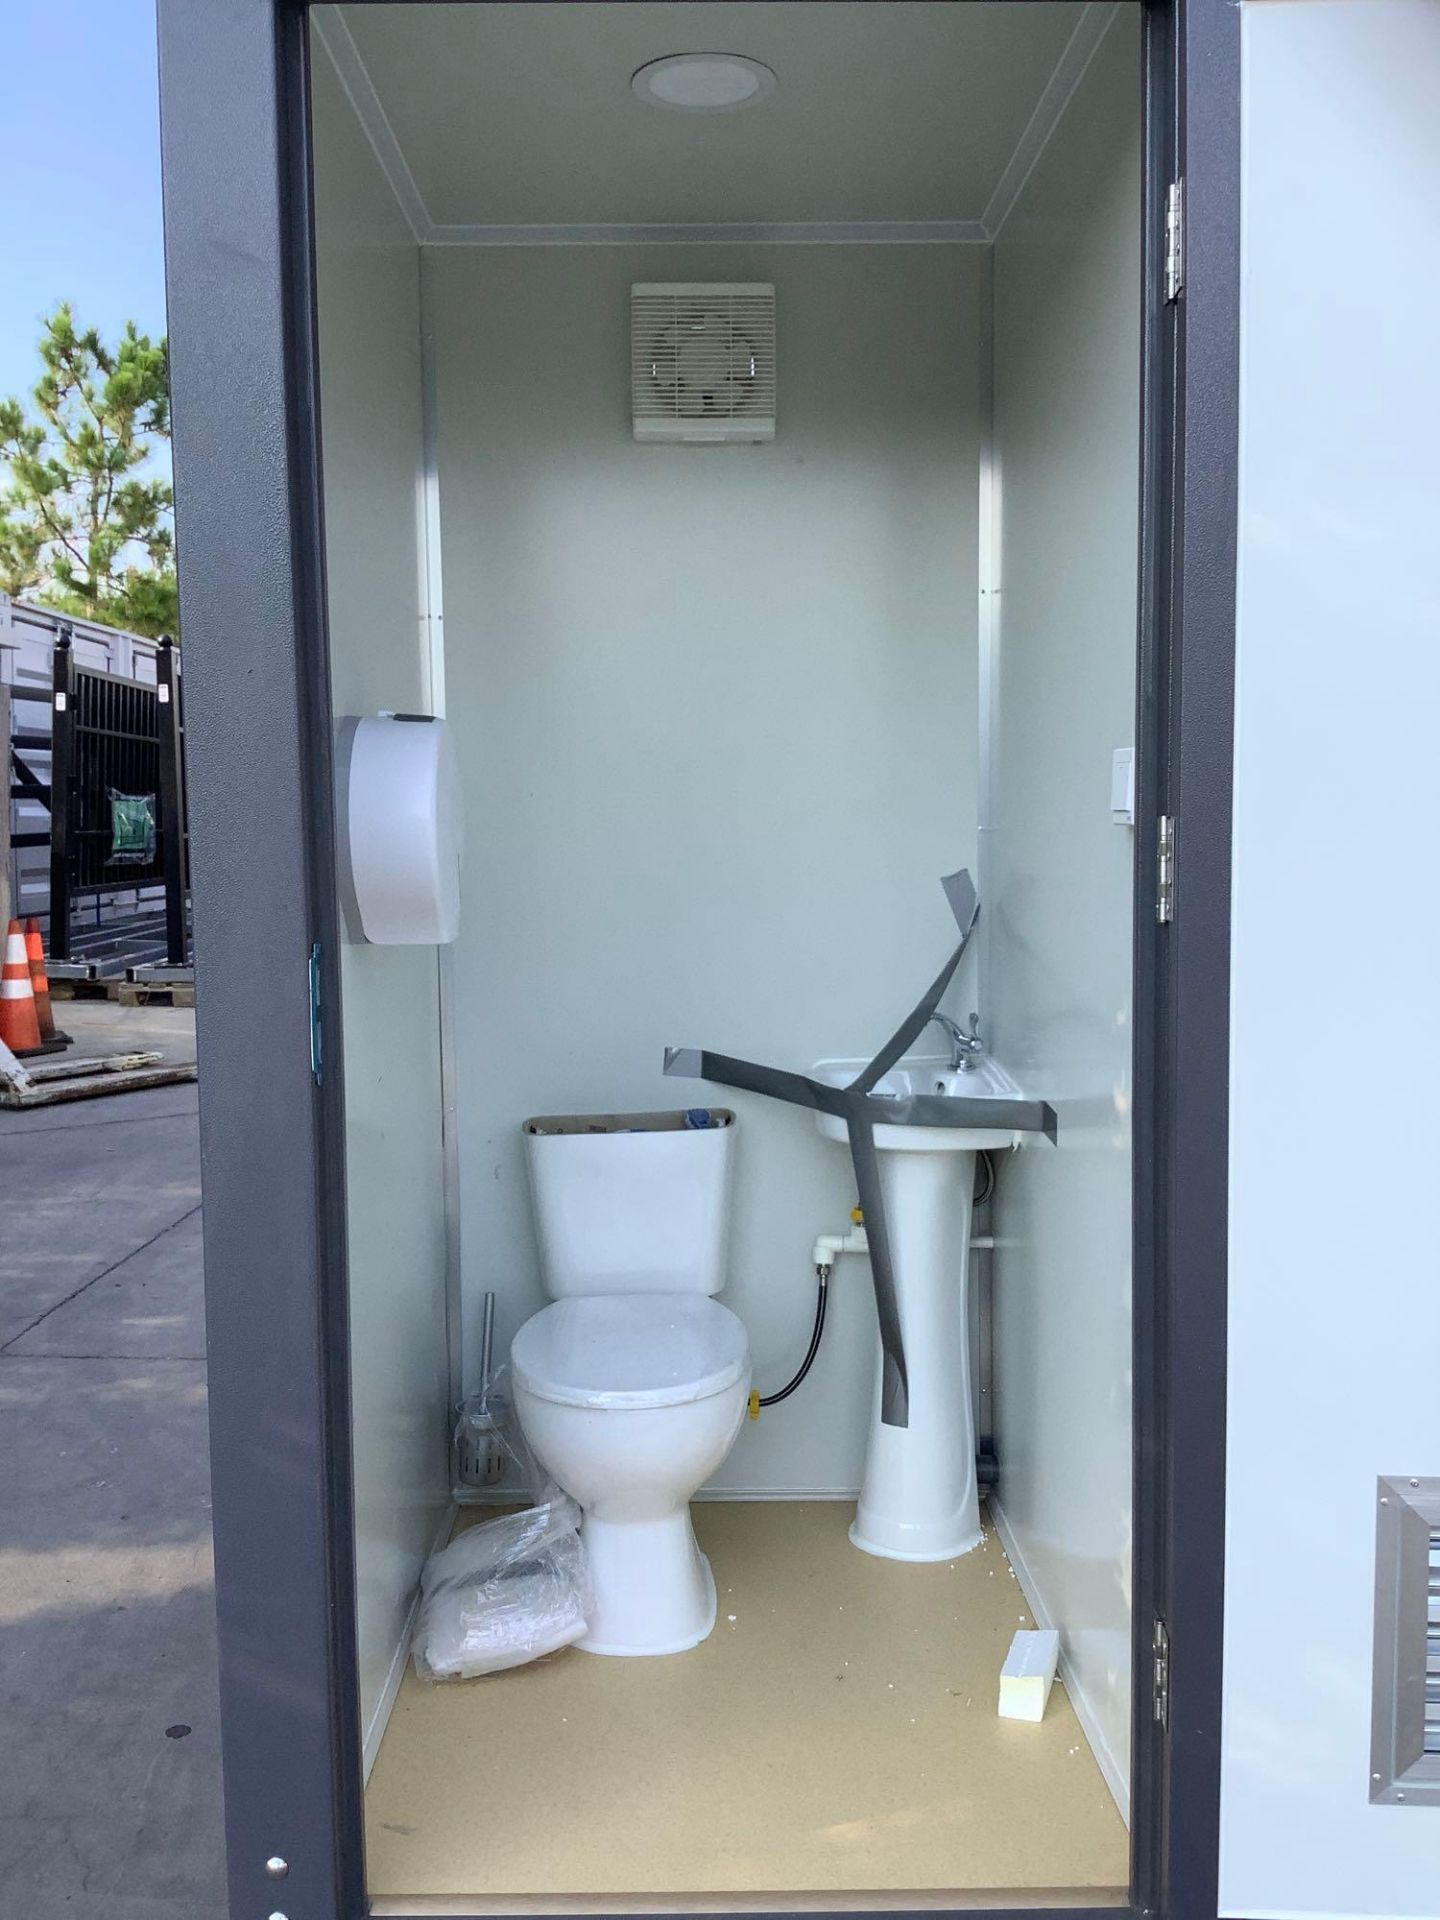 UNUSED PORTABLE DOUBLE BATHROOM UNIT, 2 STALLS, ELECTRIC & PLUMBING HOOK UP WITH EXTERIOR PLUMBING C - Image 13 of 13